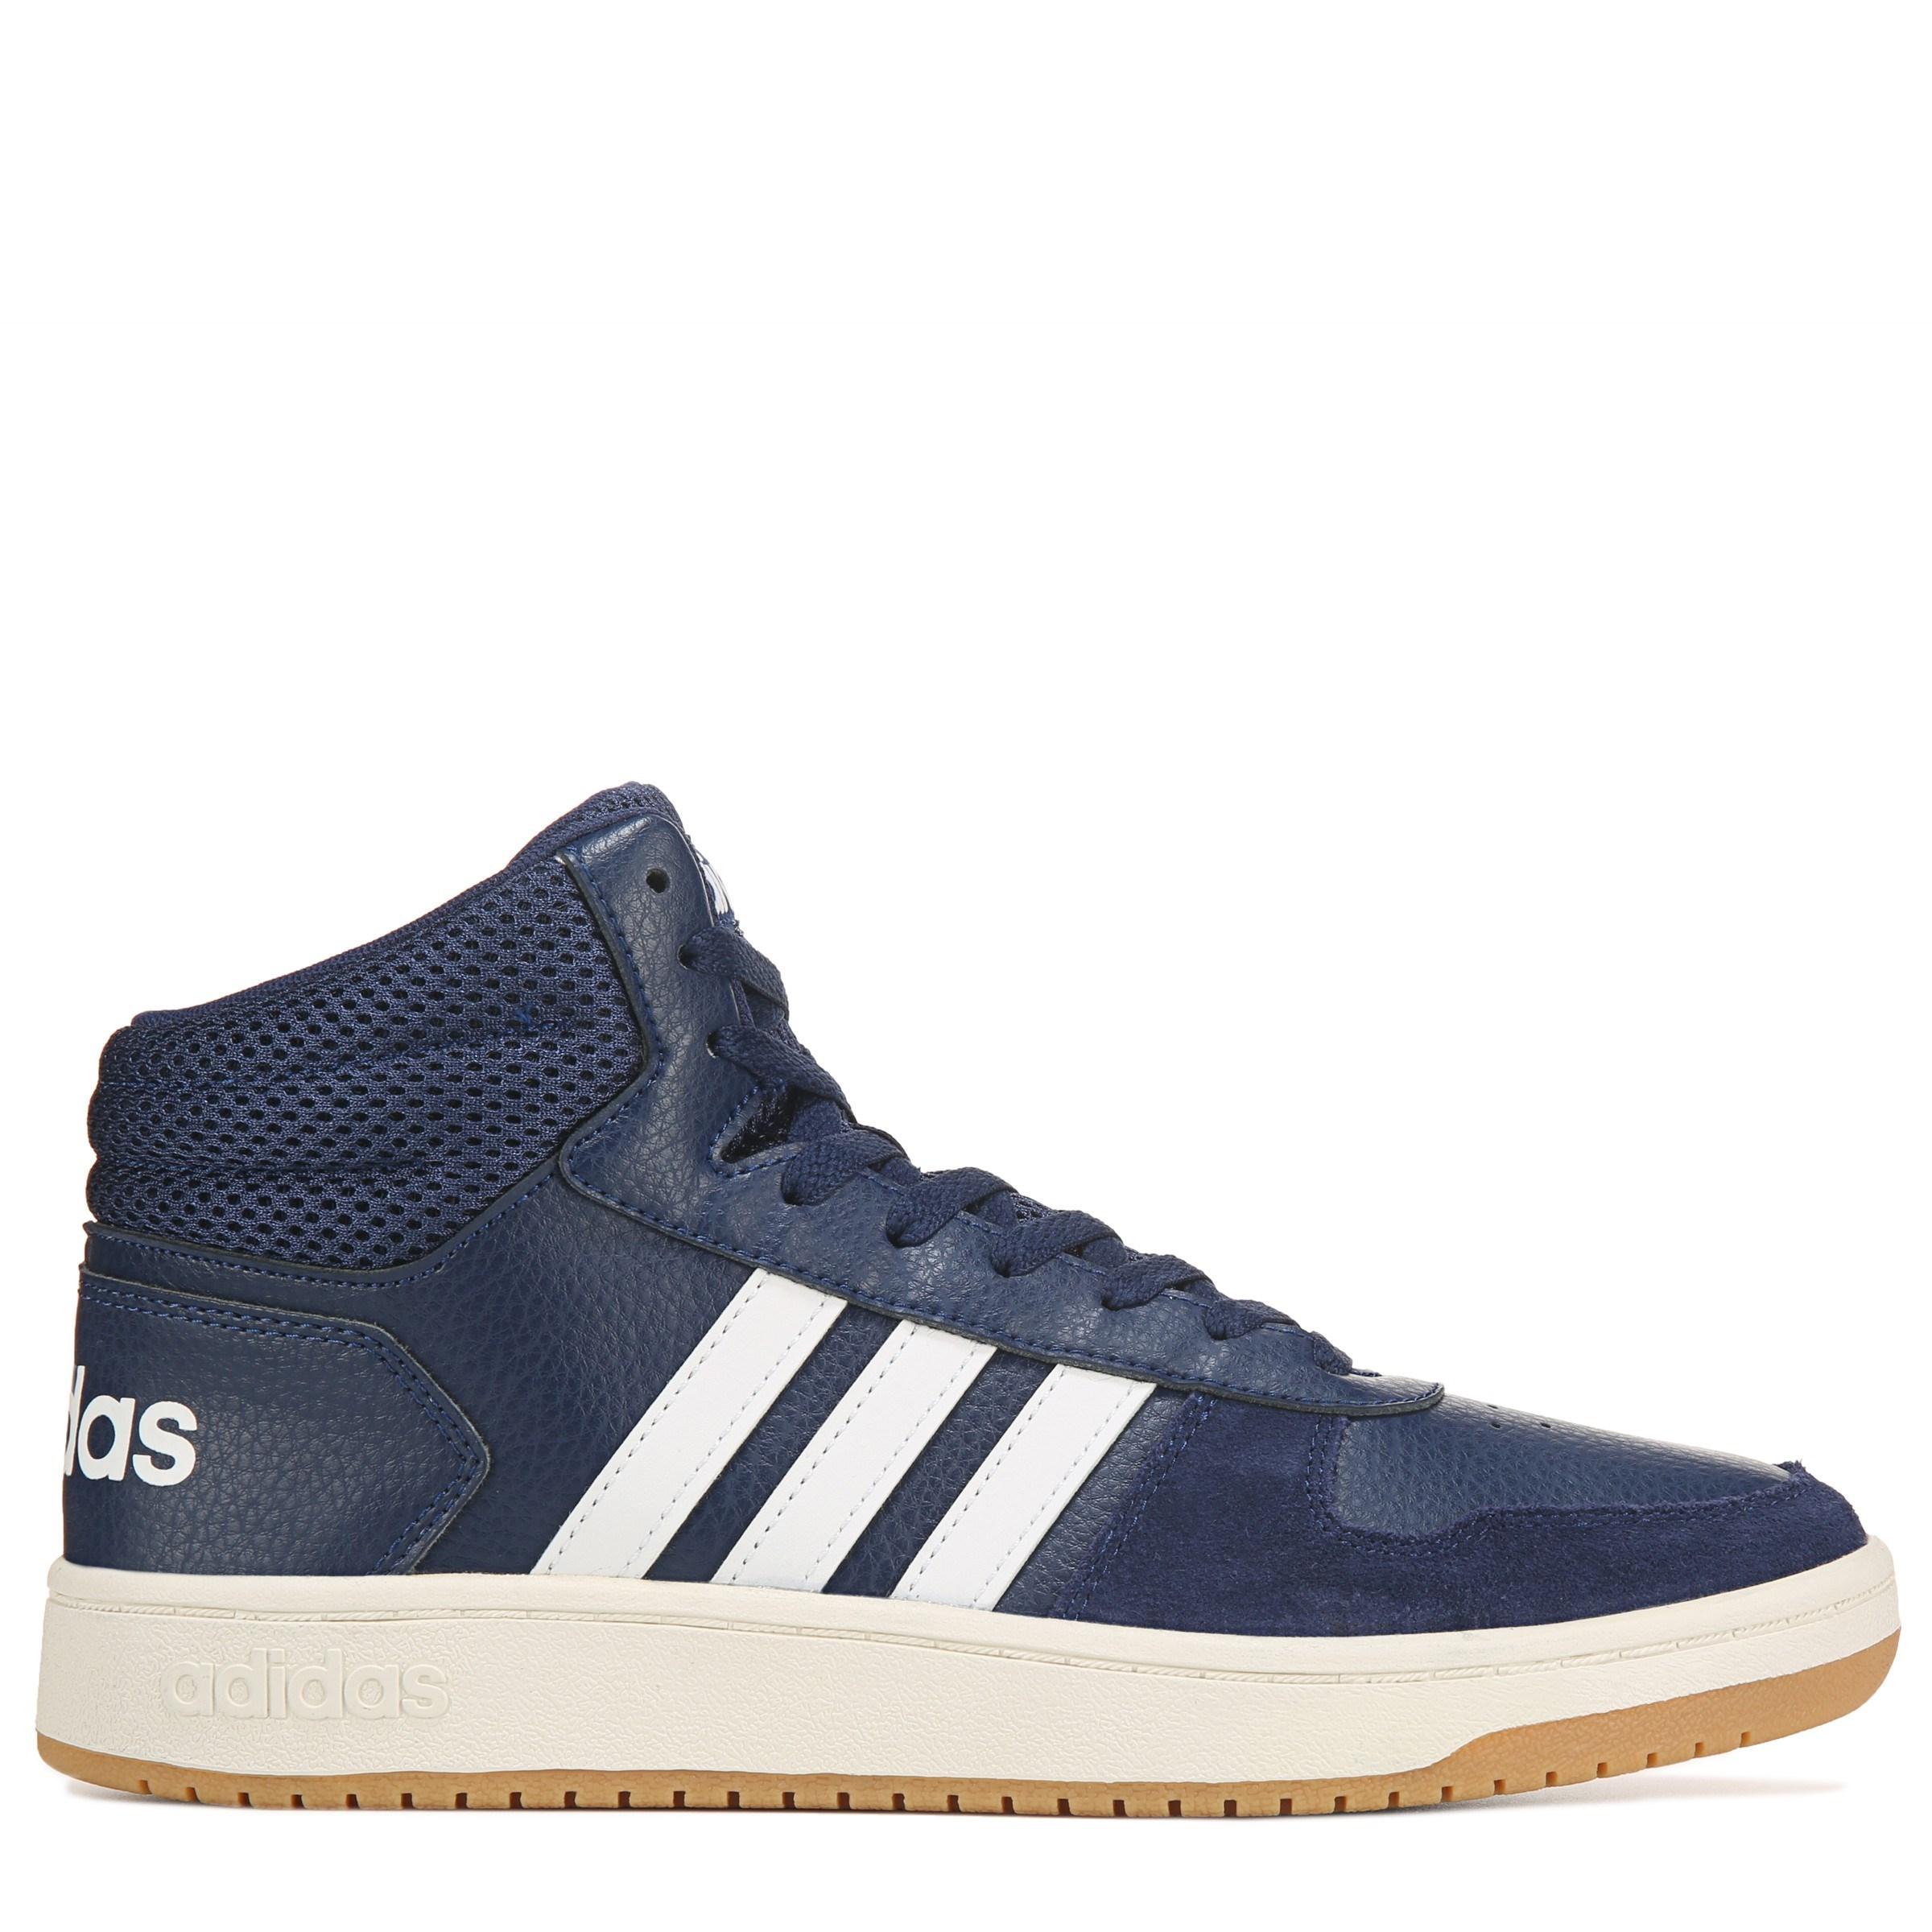 adidas Leather Hoops 2.0 Mid Sneaker in Navy (Blue) for Men - Save 17% ...